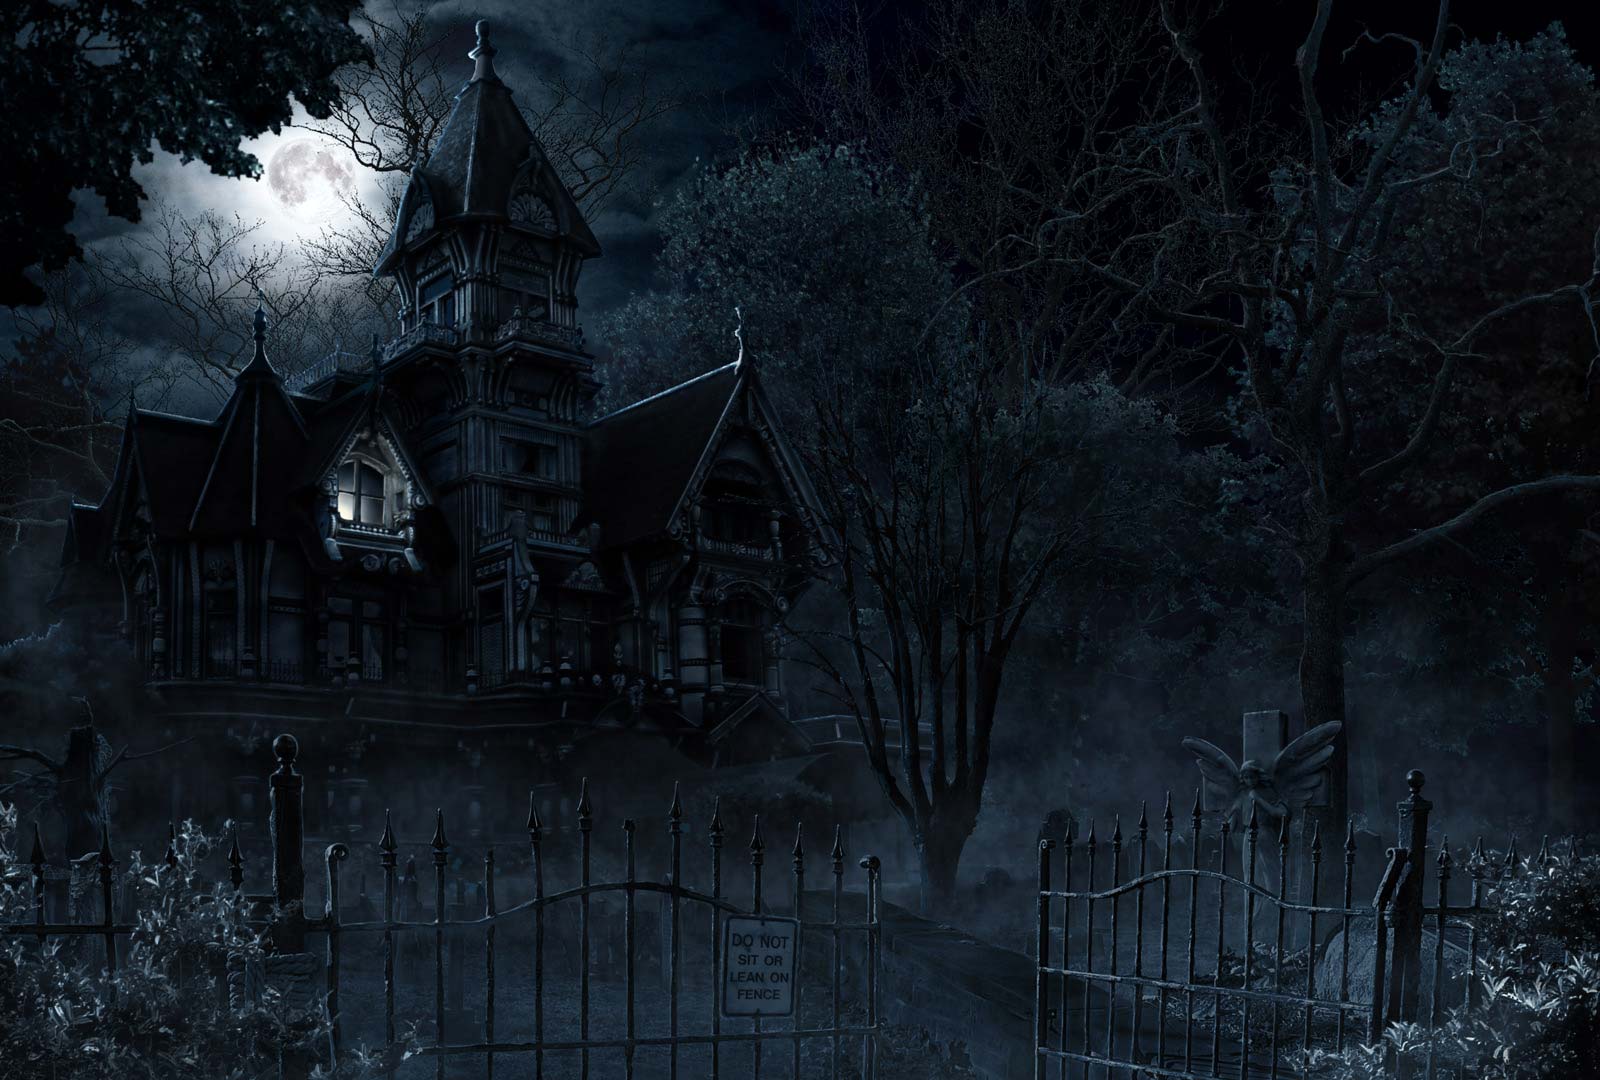 View, download, comment, and rate this 1600x1080 Haunted Wallpaper